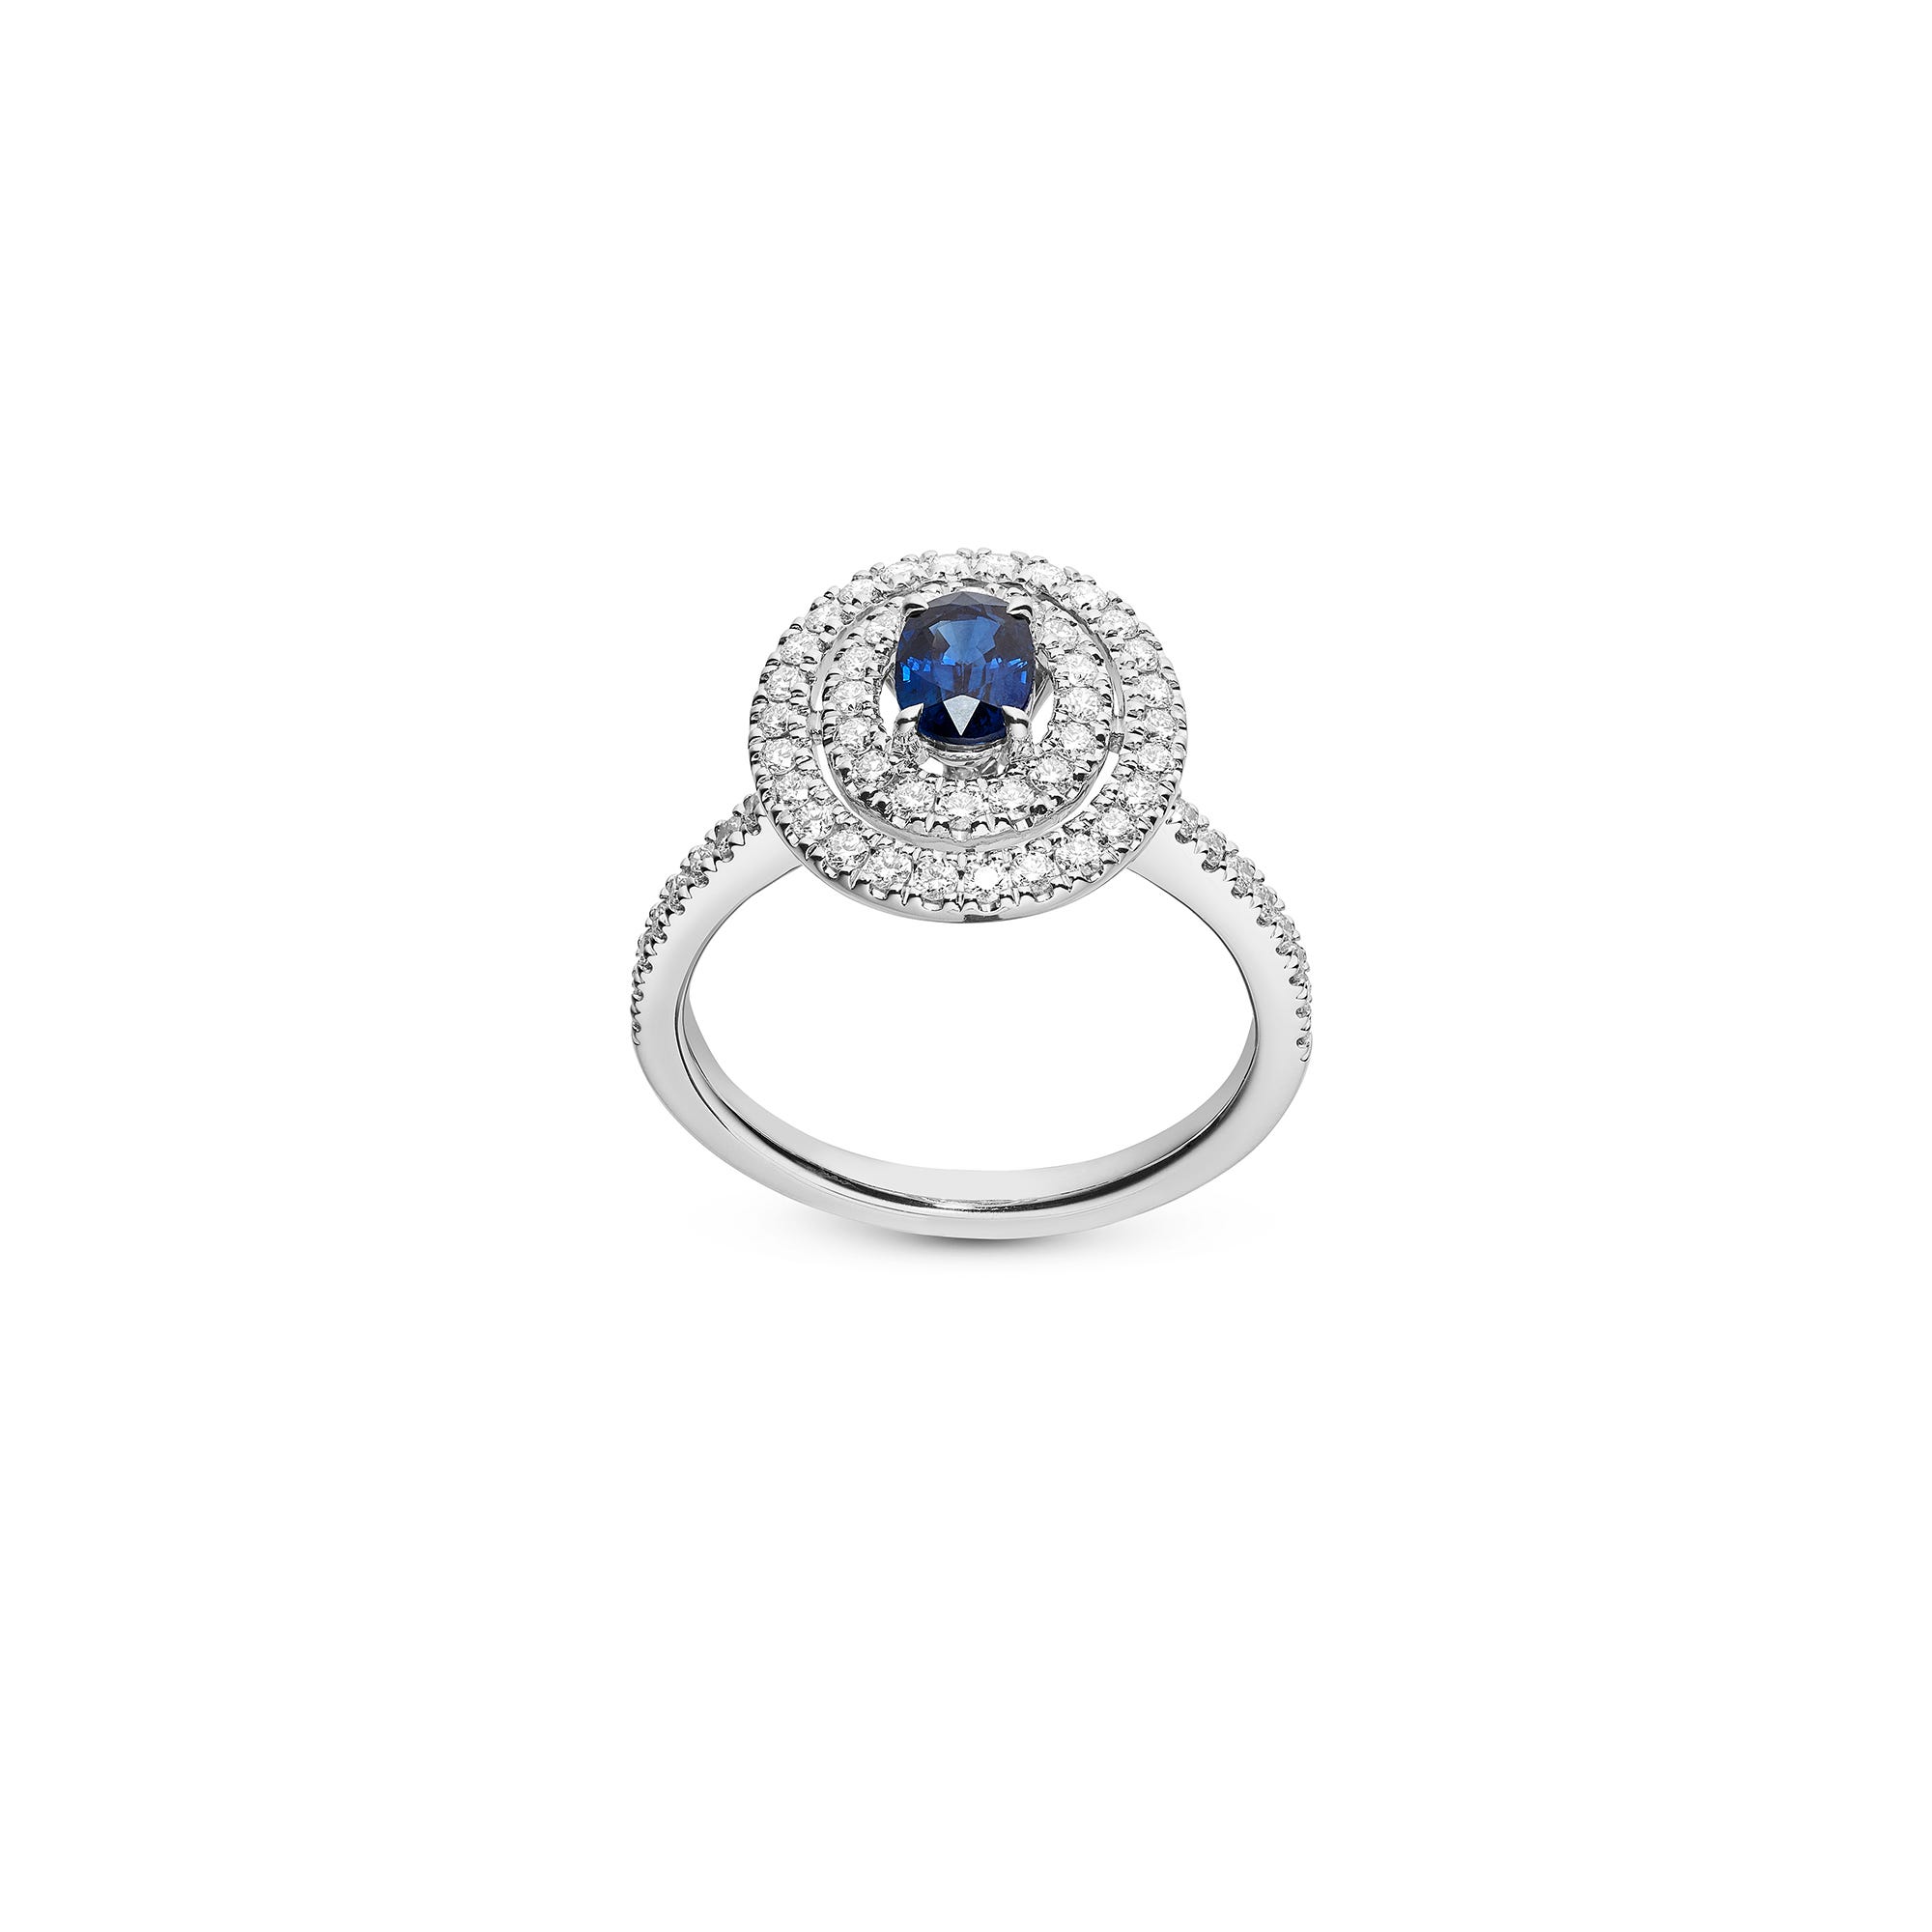 Oval Sapphire and Diamond Ring mounted in Platinum